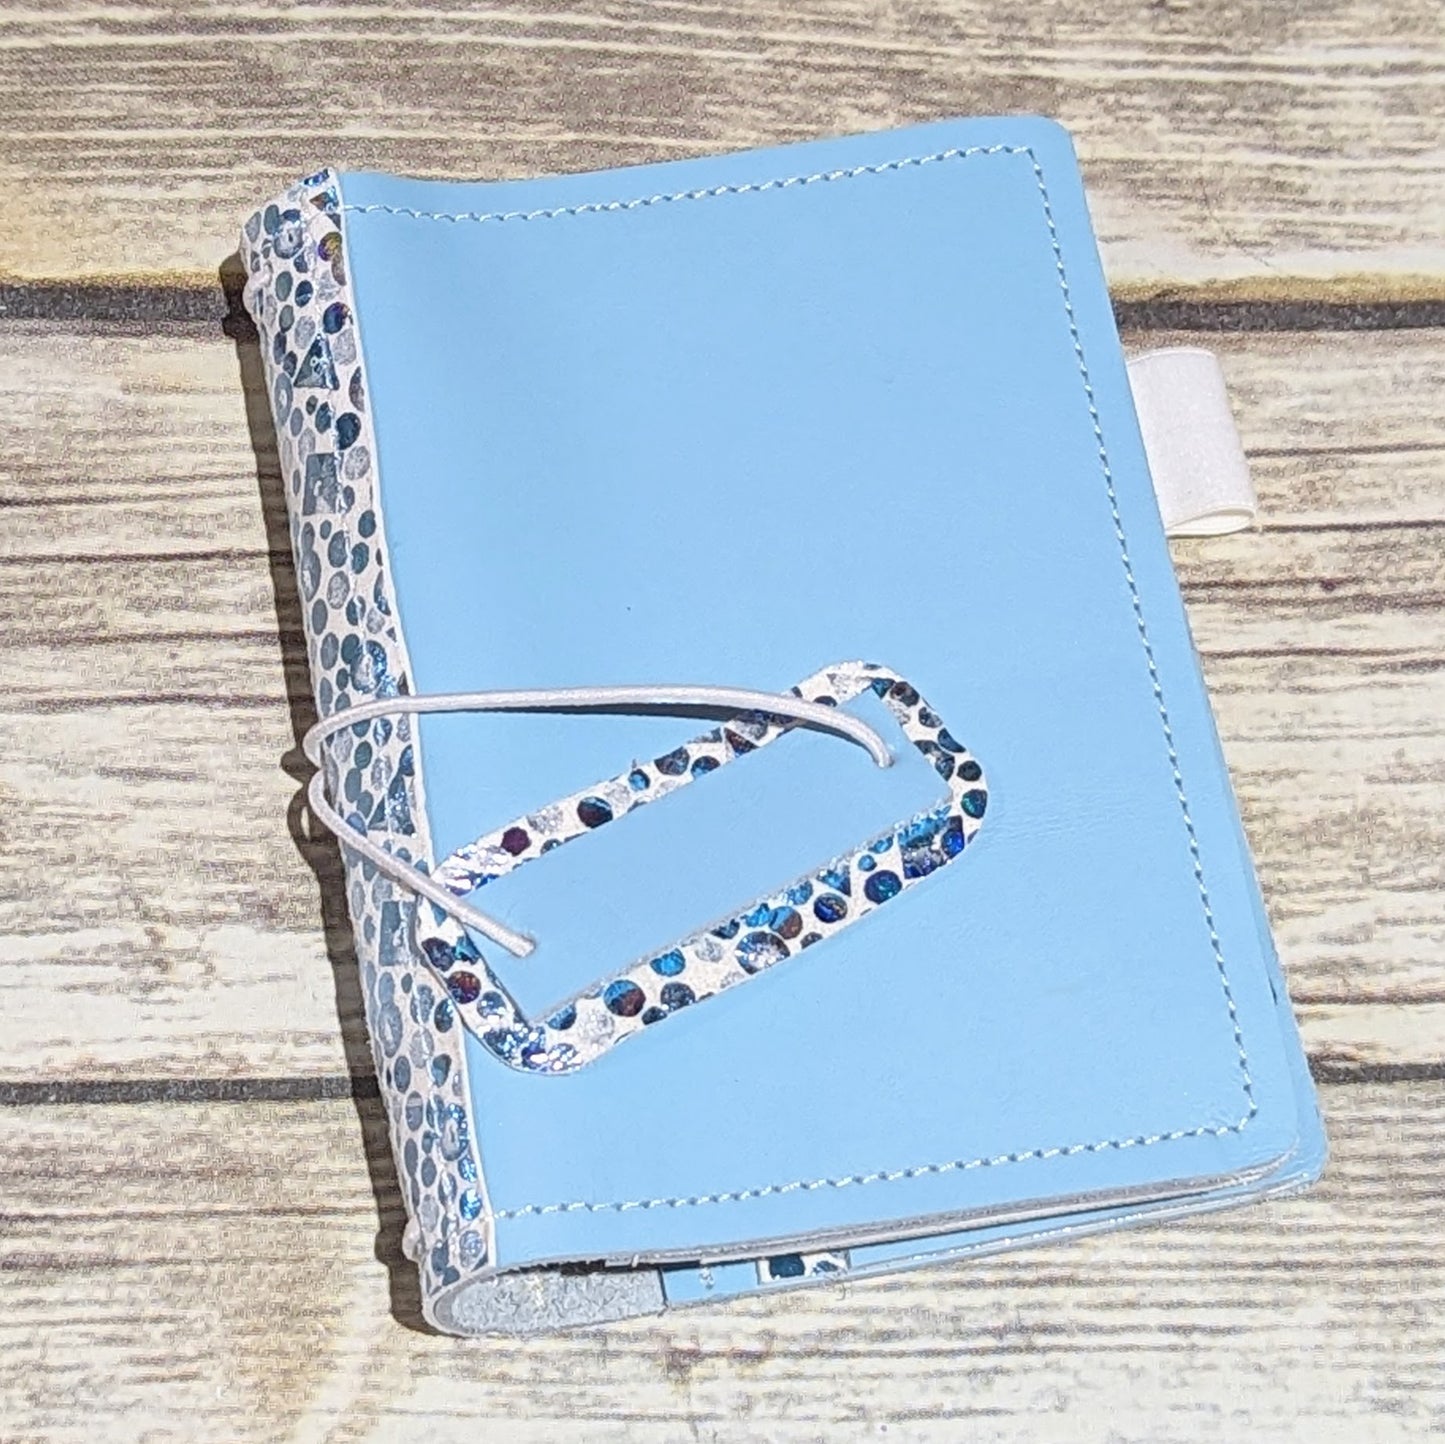 Rigby Pocket and Weeks Sized Travelers Notebook Leather Cover Ready to Ship